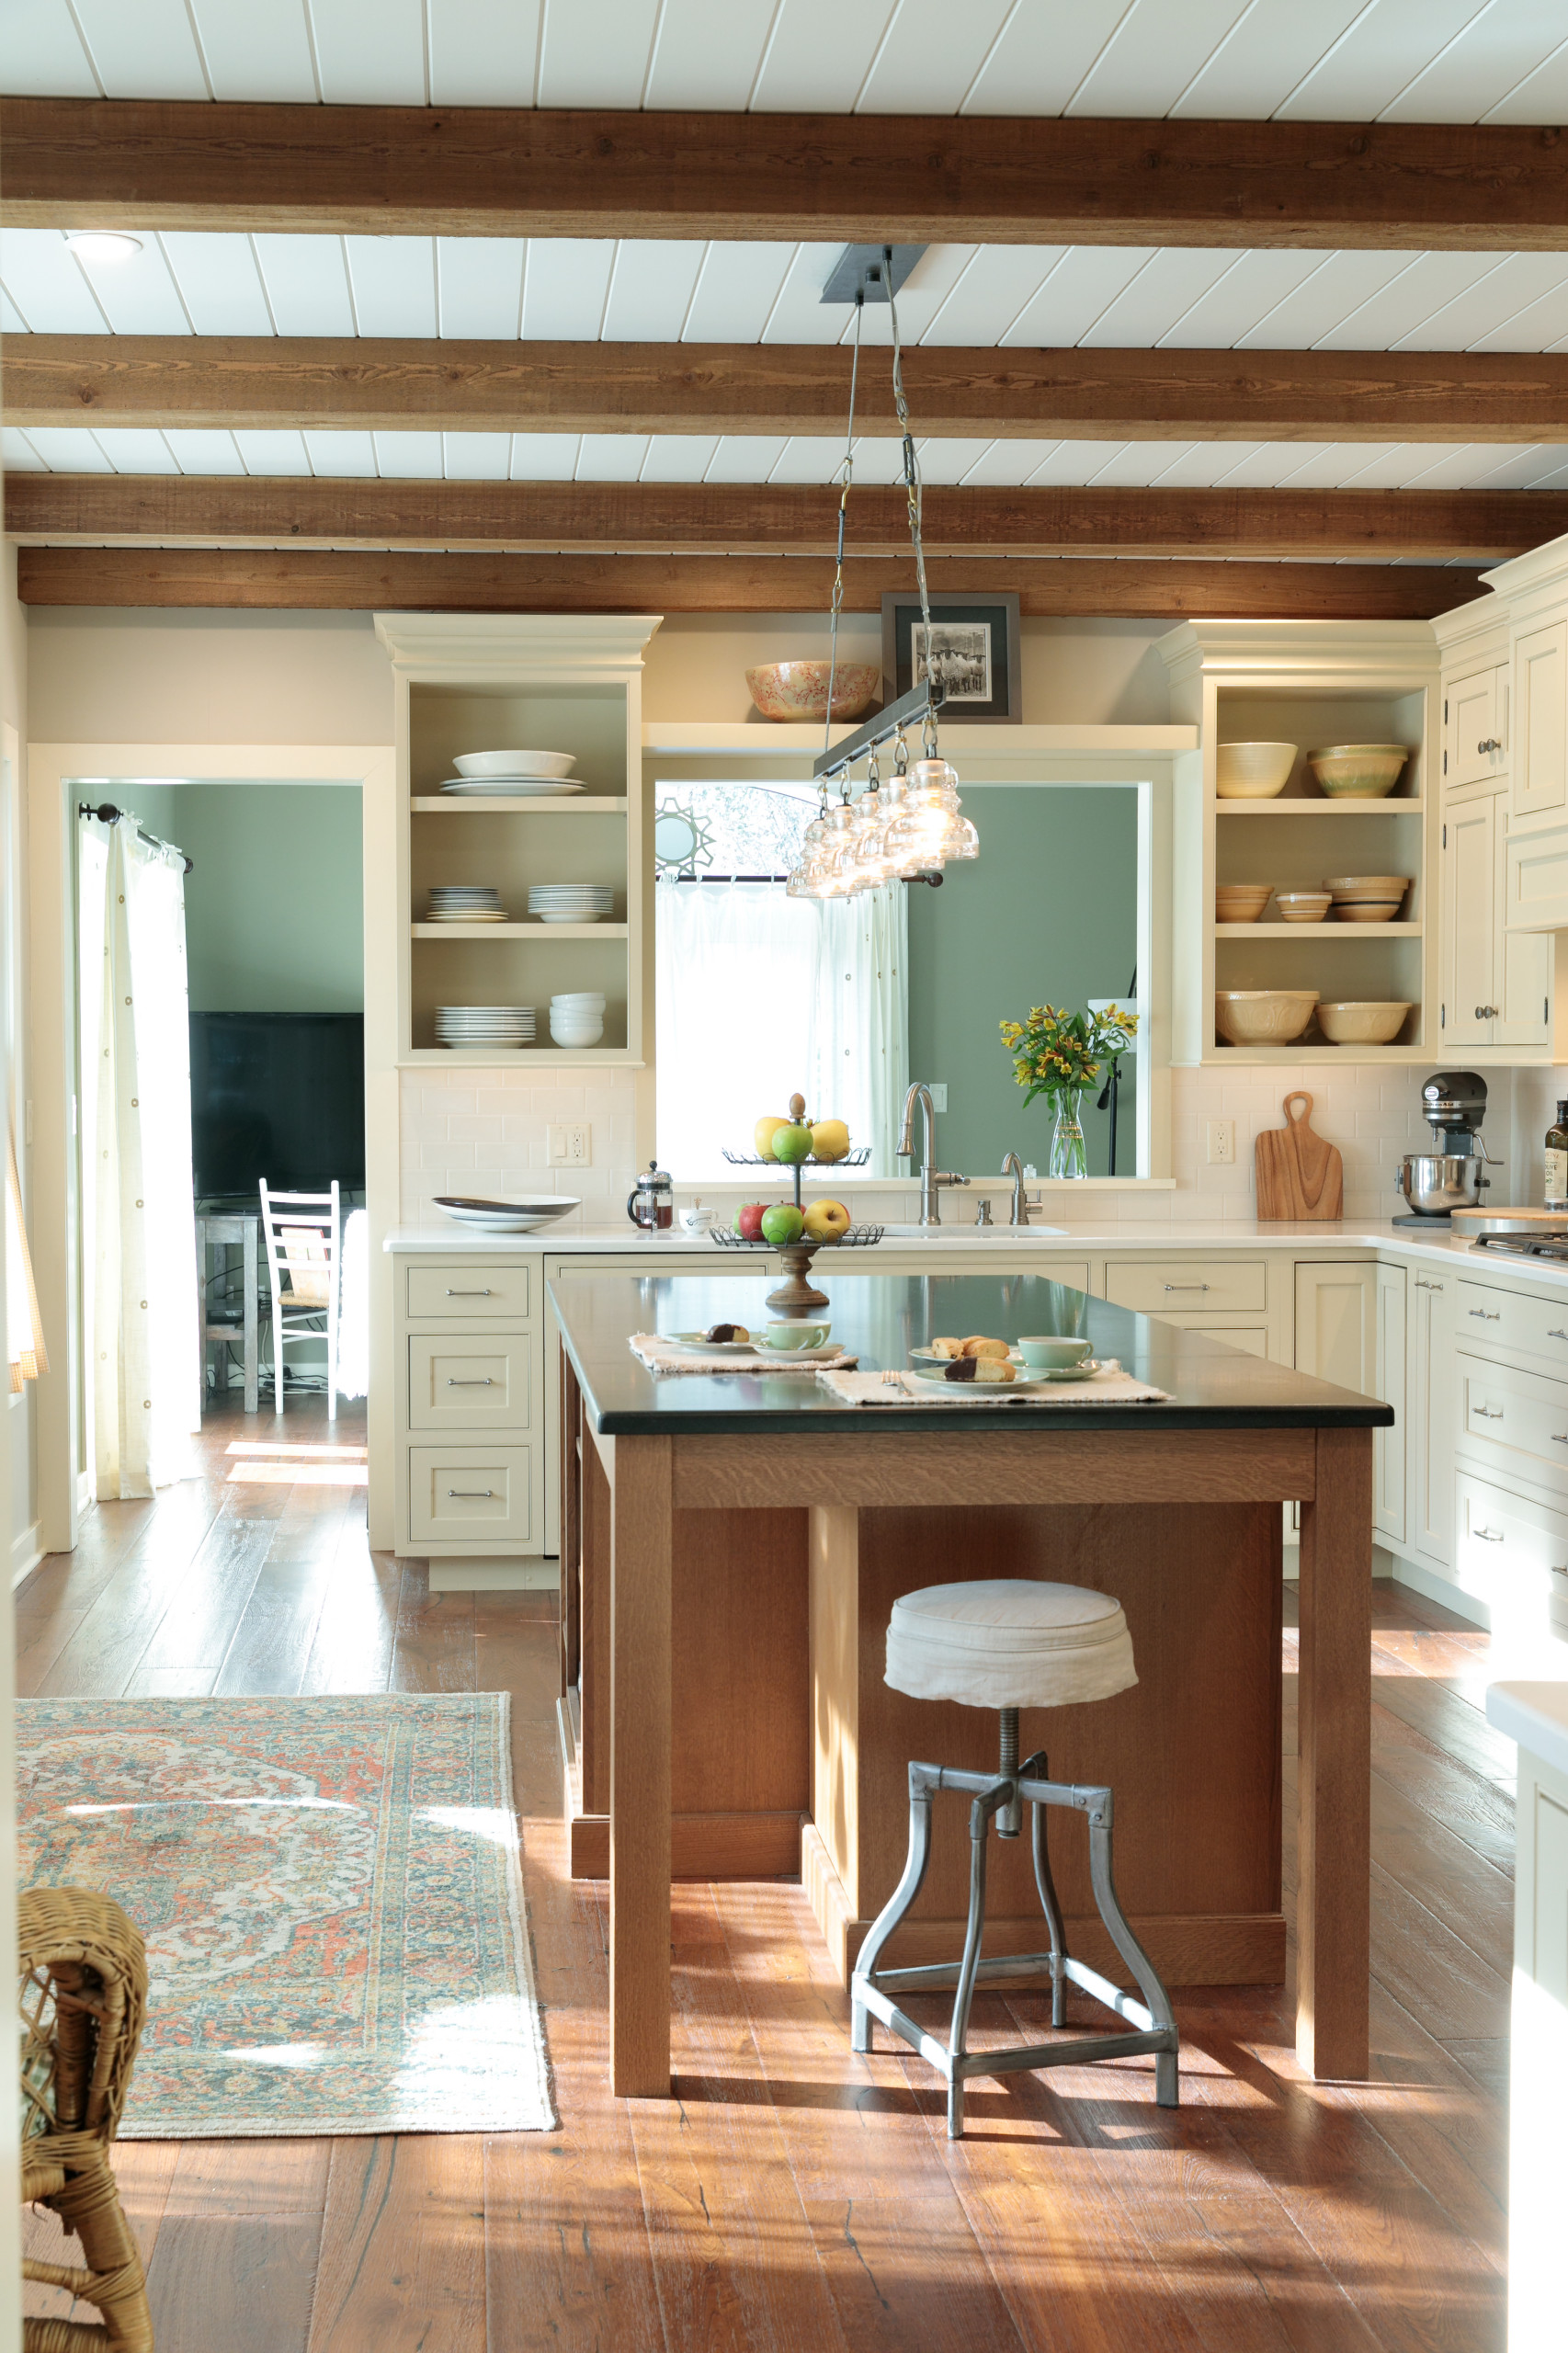 1900 Farmhouse Renovation: Kitchen Before and After - An Oregon